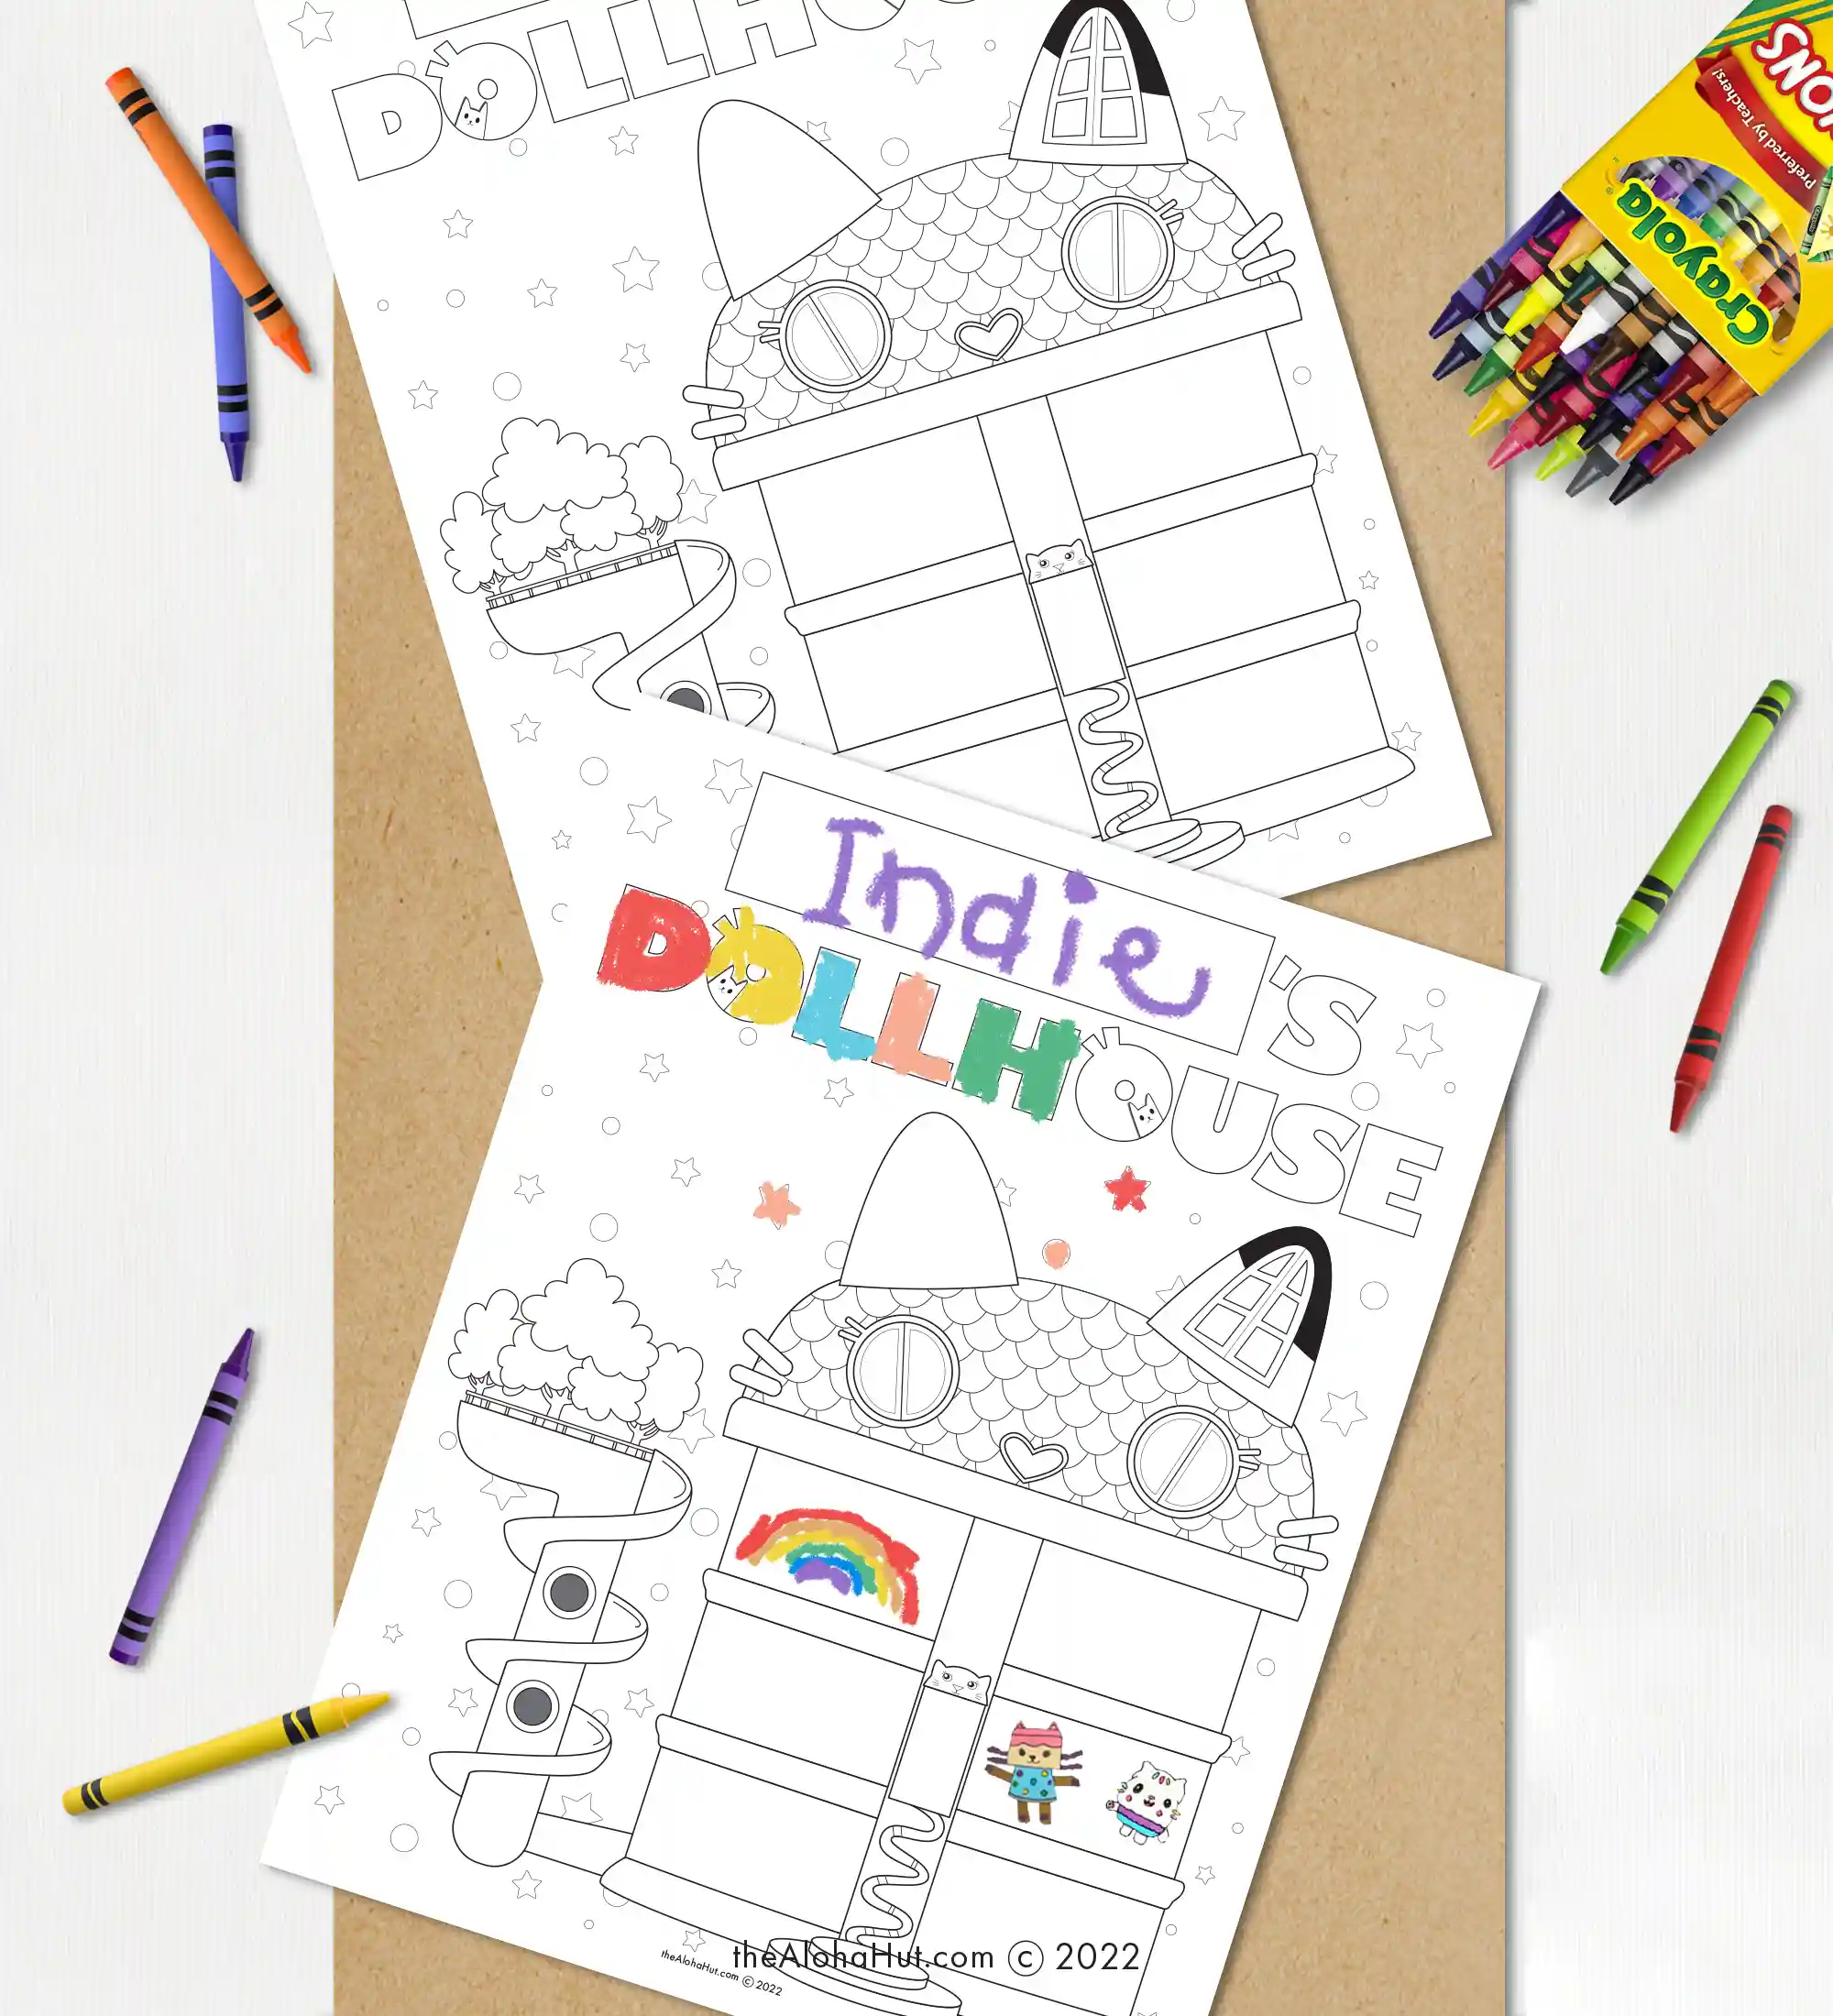 Decorate for your Gabby's Dollhouse party with printable Gabby themed prints. Includes Gabby's Dollhouse thank you tags, welcome sign, cupcake toppers, cake topper, happy birthday banner, Gabby stickers and tags, birthday garland, character cutouts for large decor, games, activities, and coloring pages.